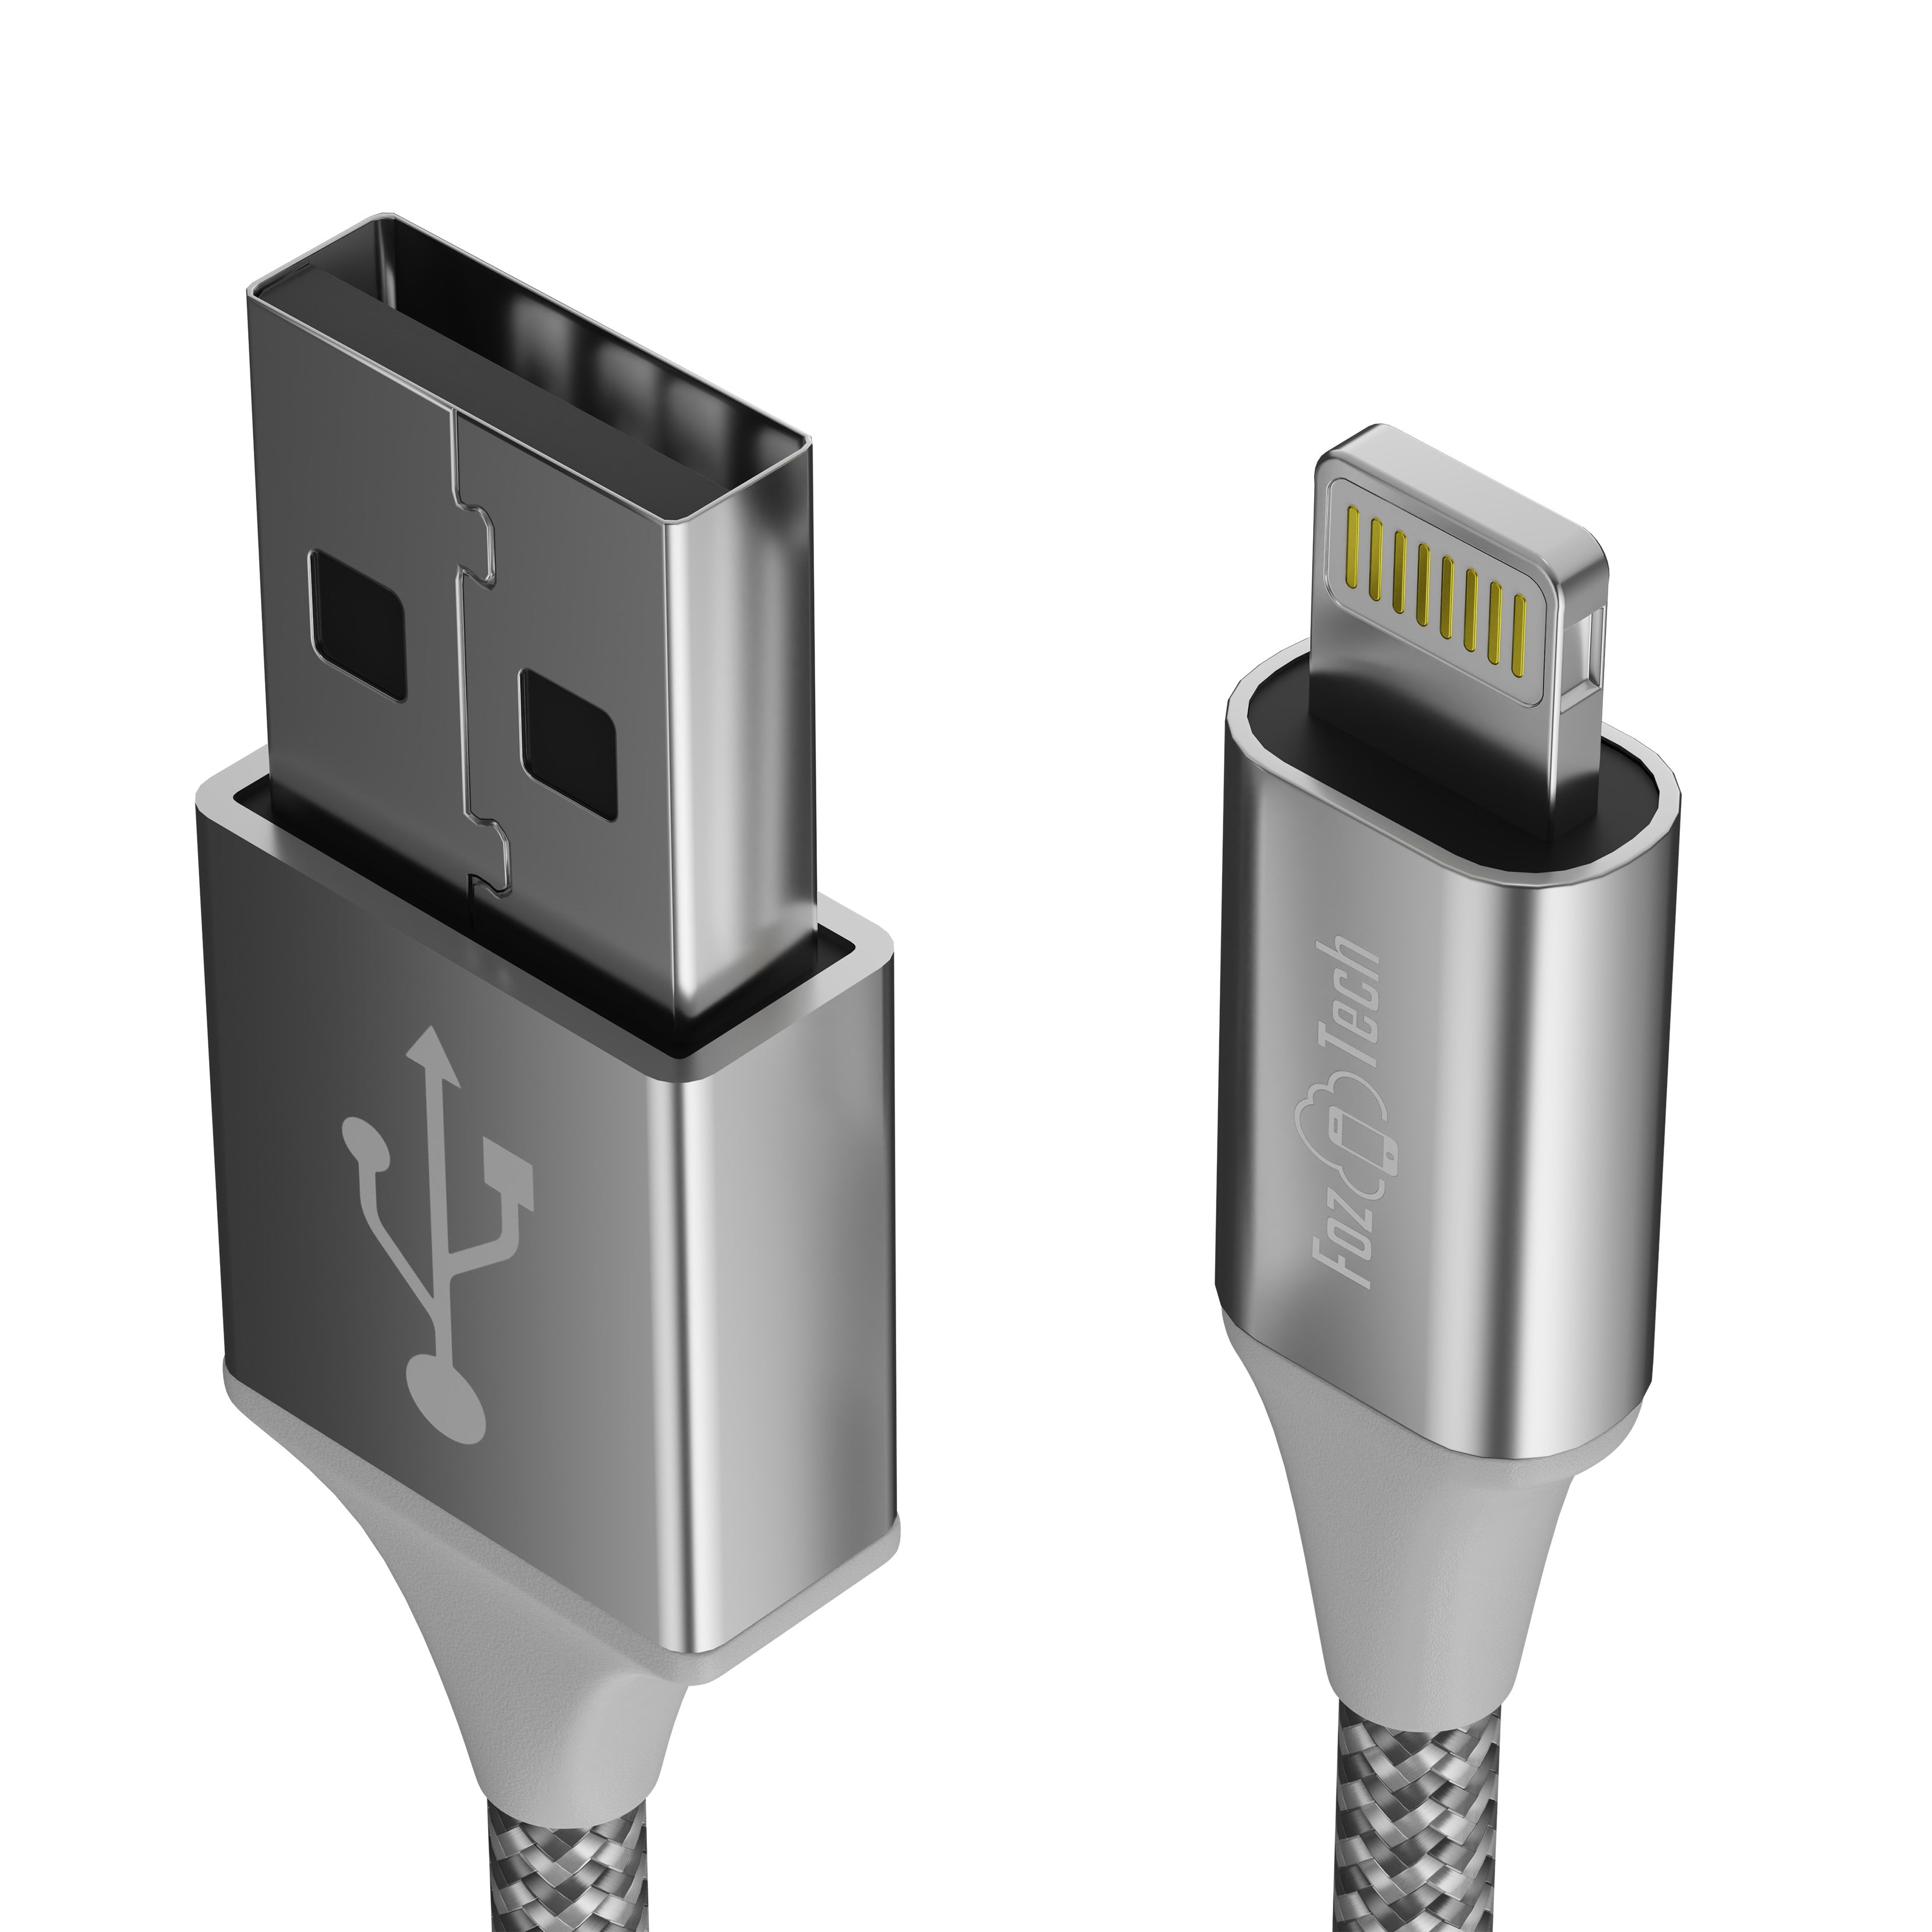 FozTech - PRO Series - USB Charger Cable Data Sync Lead for iPhone, iPad, iPod - Silver - USB Cable - FozTech